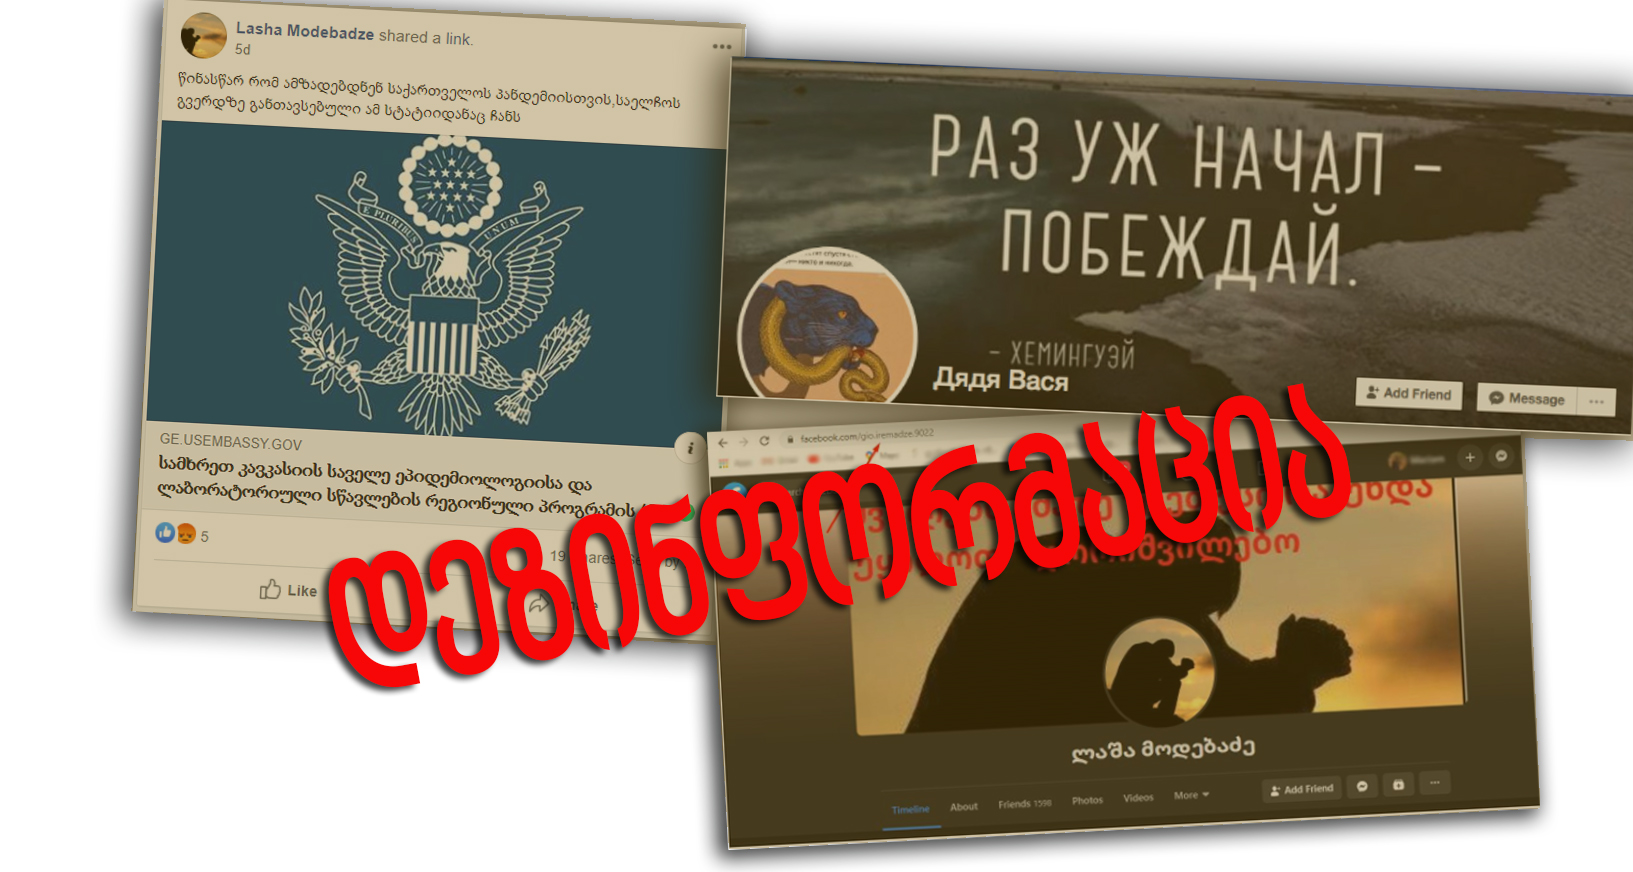 Дядя Вася (Uncle Vasia) and other trolls disseminate conspiracy against the US Embassy training program